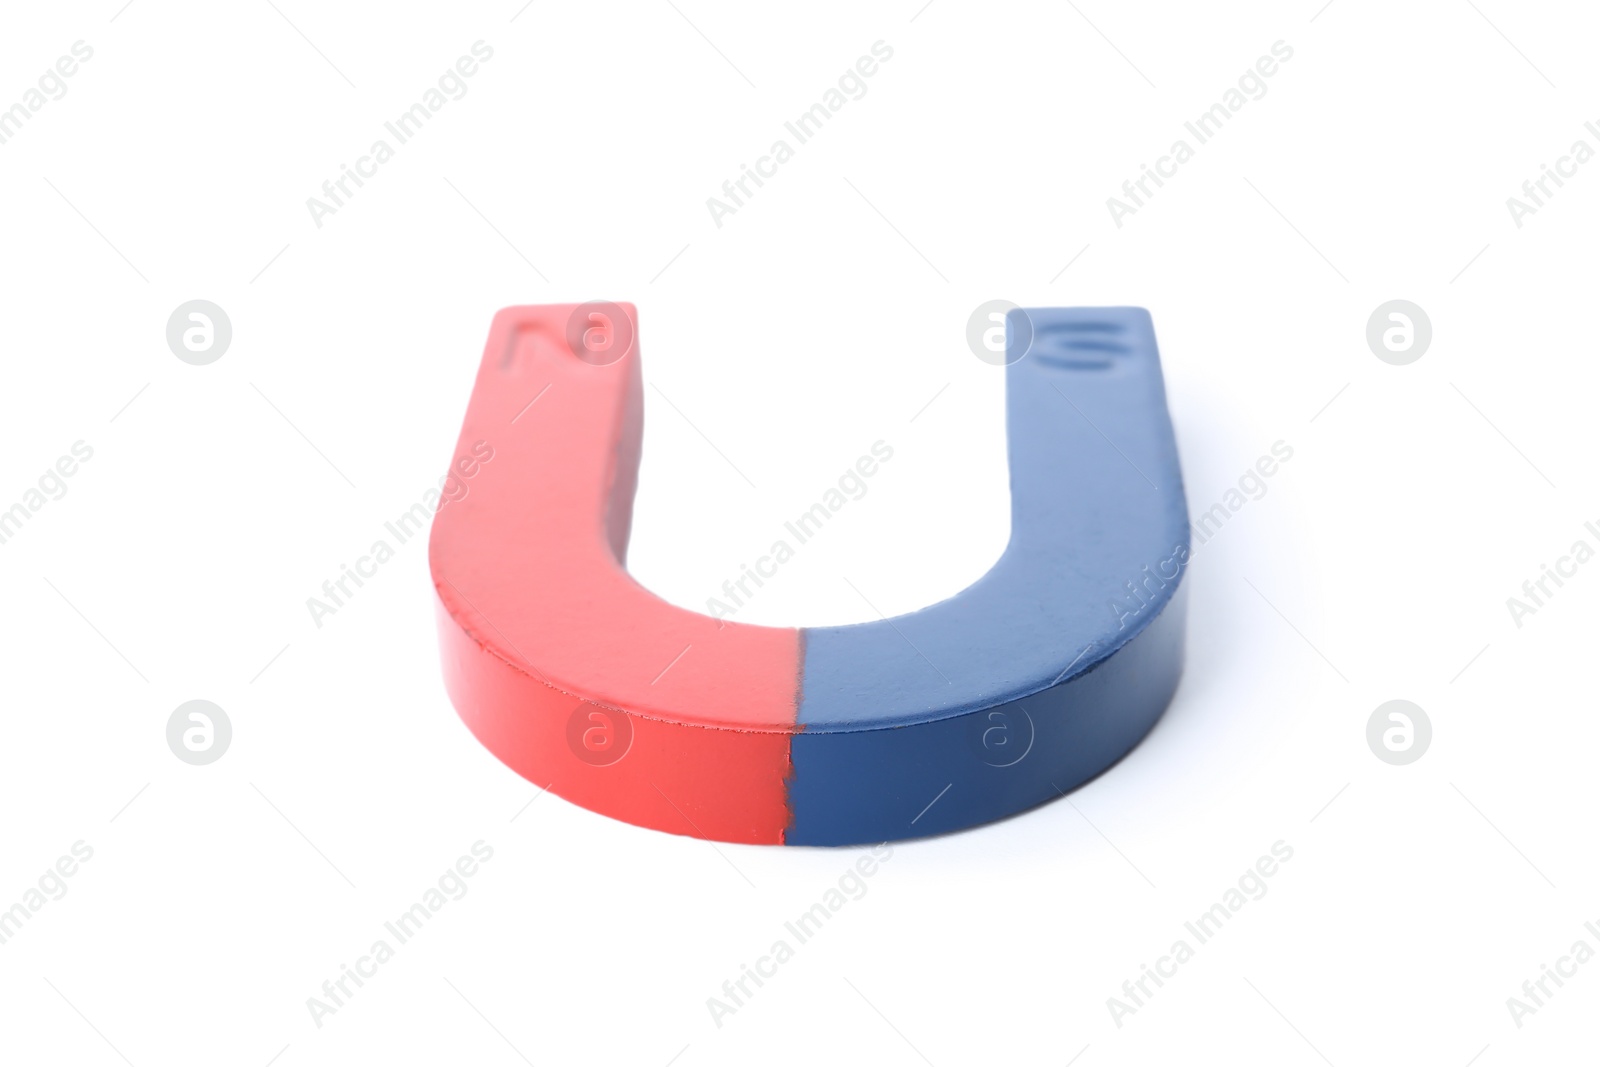 Photo of Red and blue horseshoe magnet isolated on white